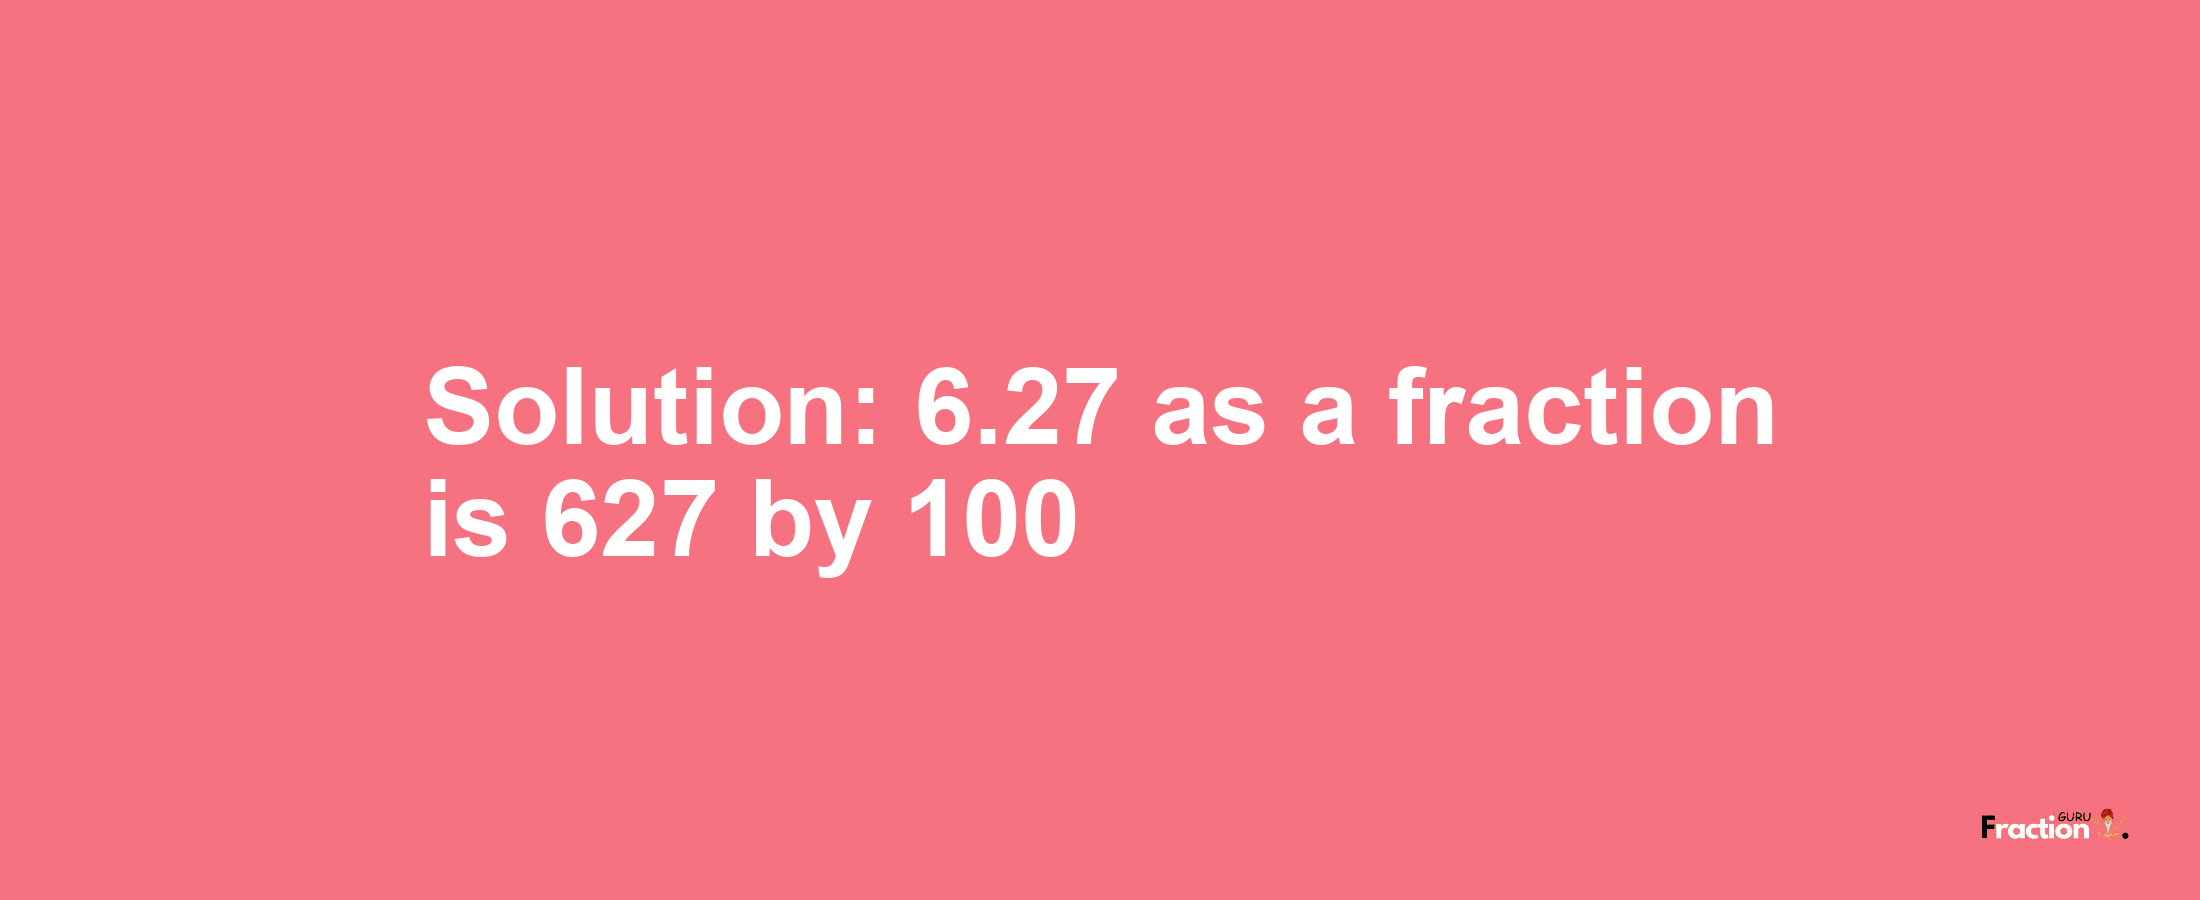 Solution:6.27 as a fraction is 627/100